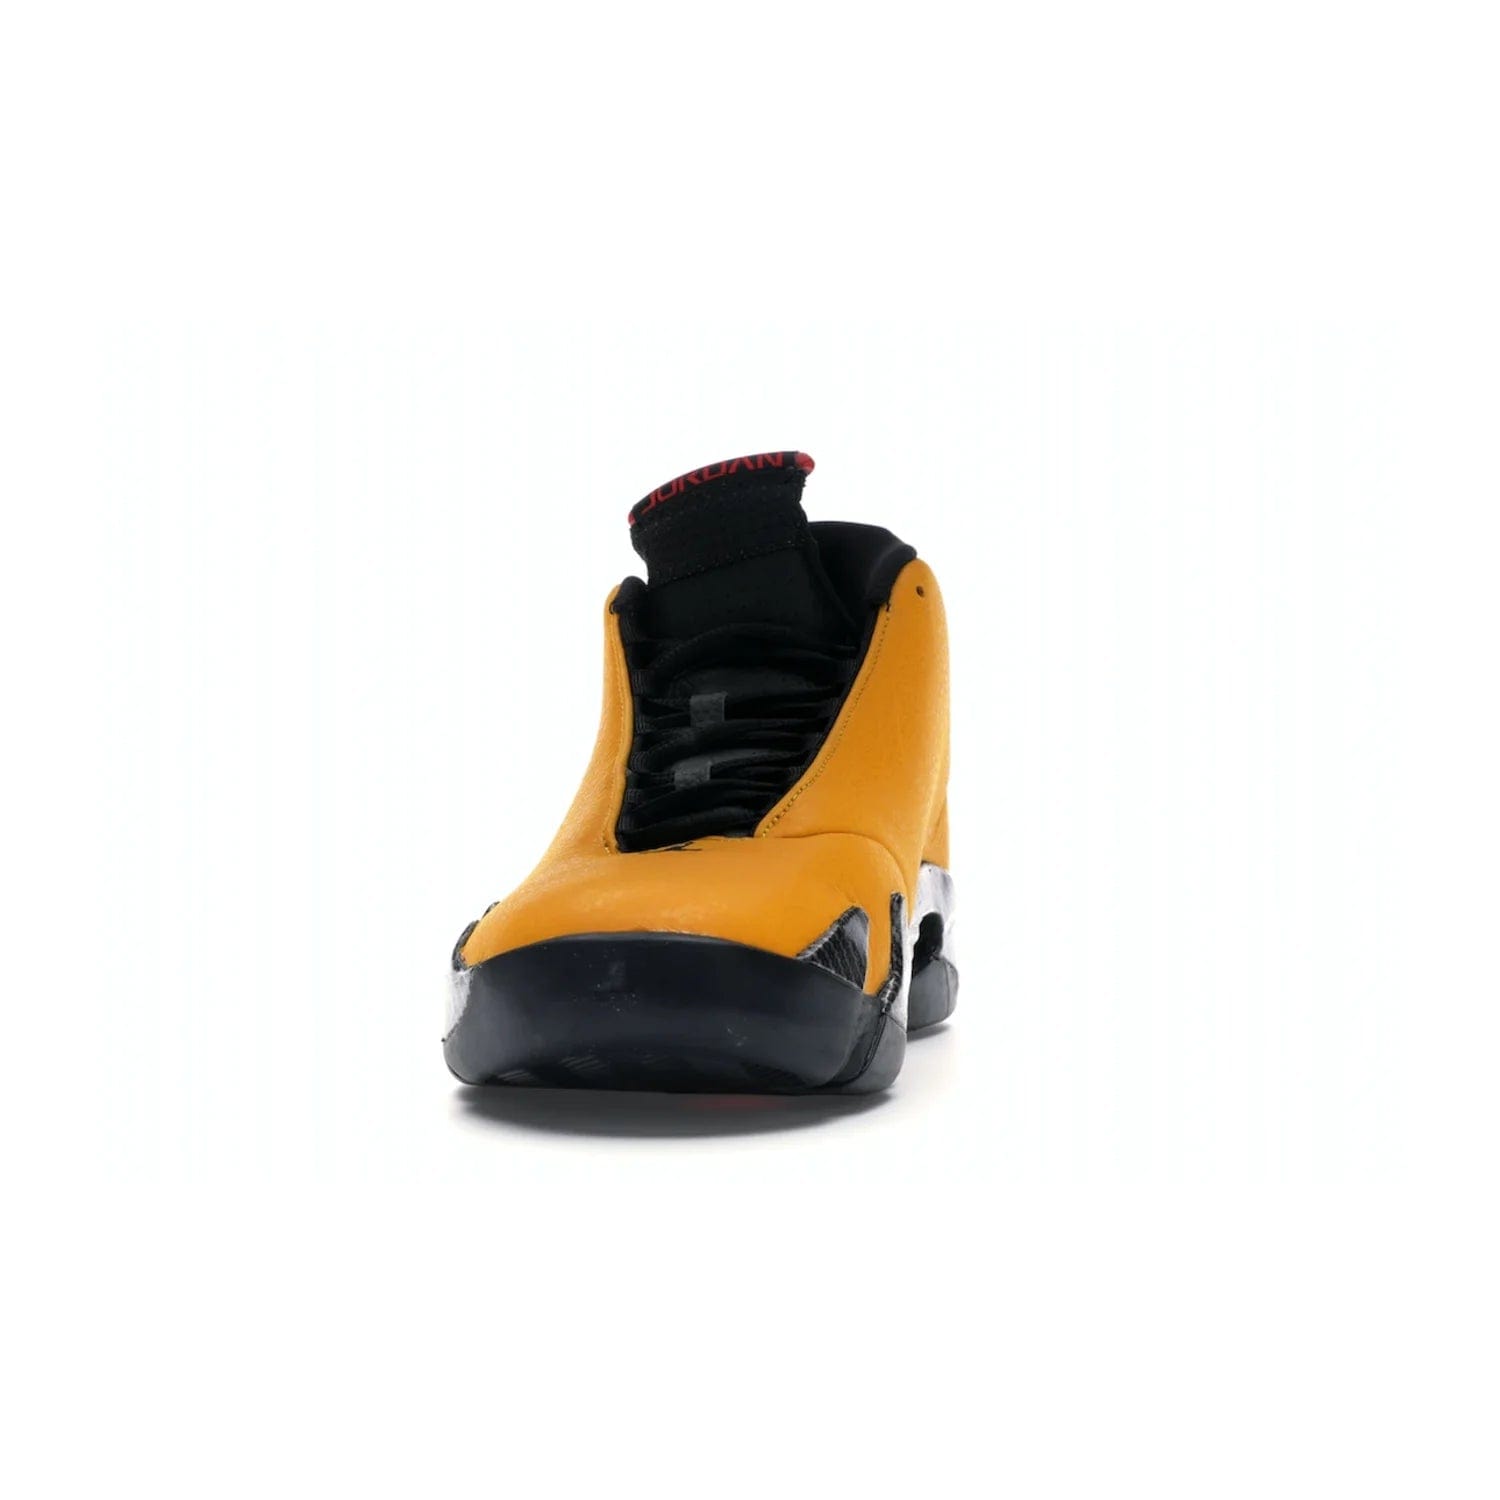 Jordan 14 Retro University Gold - Image 11 - Only at www.BallersClubKickz.com - Air Jordan 14 Retro University Gold: High-quality leather sneaker with Jumpman, tongue & heel logos. Zoom Air units & herringbone traction for superior comfort. University Gold outsole for stylish streetwear.